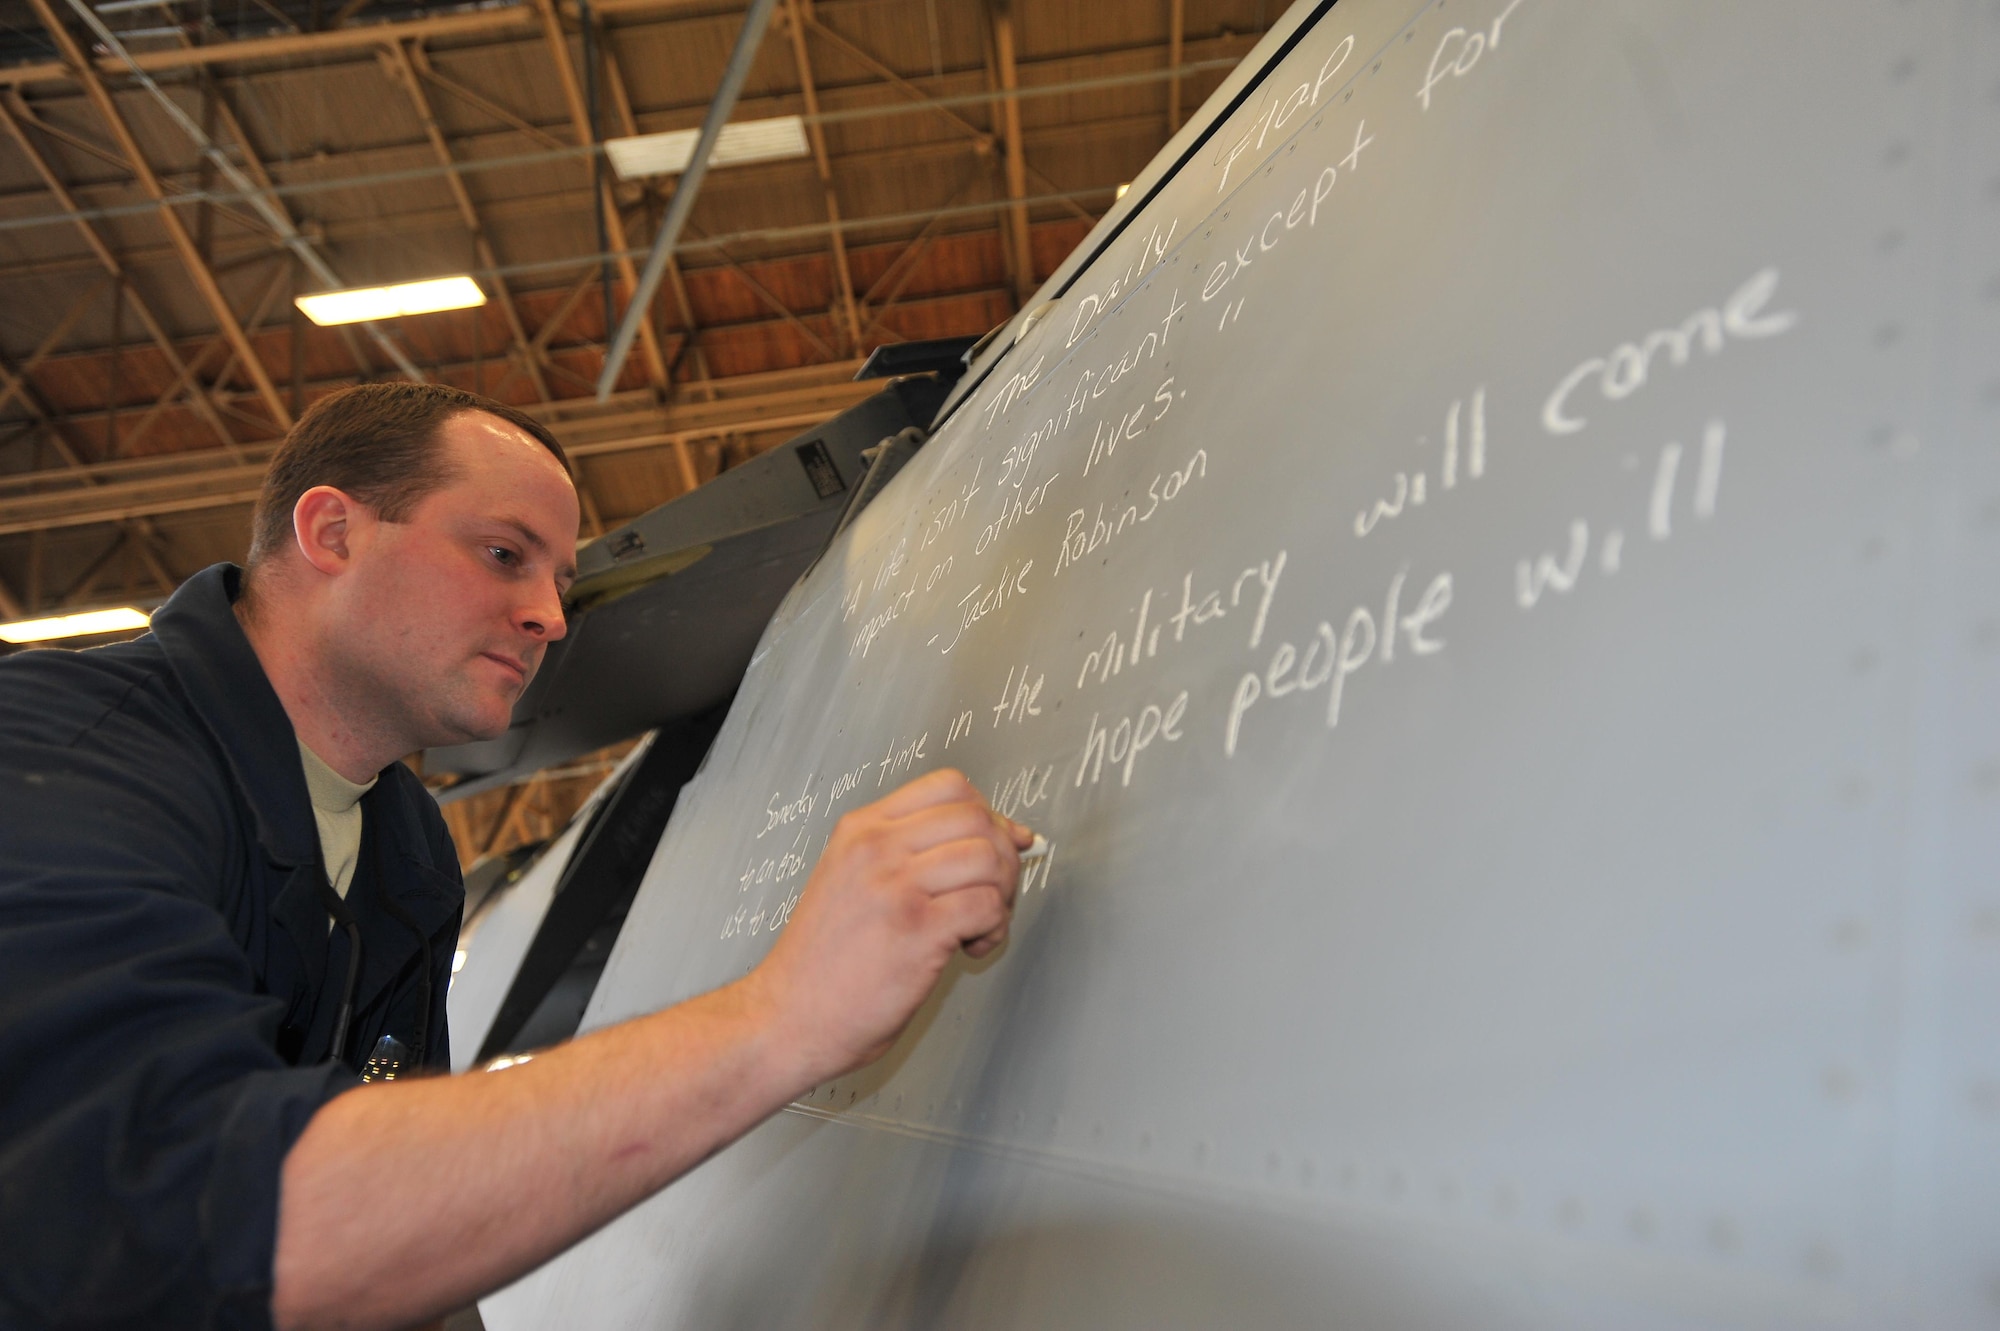 Tech. Sgt. Eric Laflin writes an inspirational quote, referred to as the “daily flap,” on an aircraft’s wing inboard flap Jan. 10, 2015, at Fairchild Air Force Base, Wash. Laflin began the daily flap roughly six months ago after completing the NCO professional enhancement course here to motivate and inspire Airmen in his shop. Laflin is a 141st Maintenance Squadron aircraft inspector. (U.S. Air Force photo/Staff Sgt. Veronica Montes)